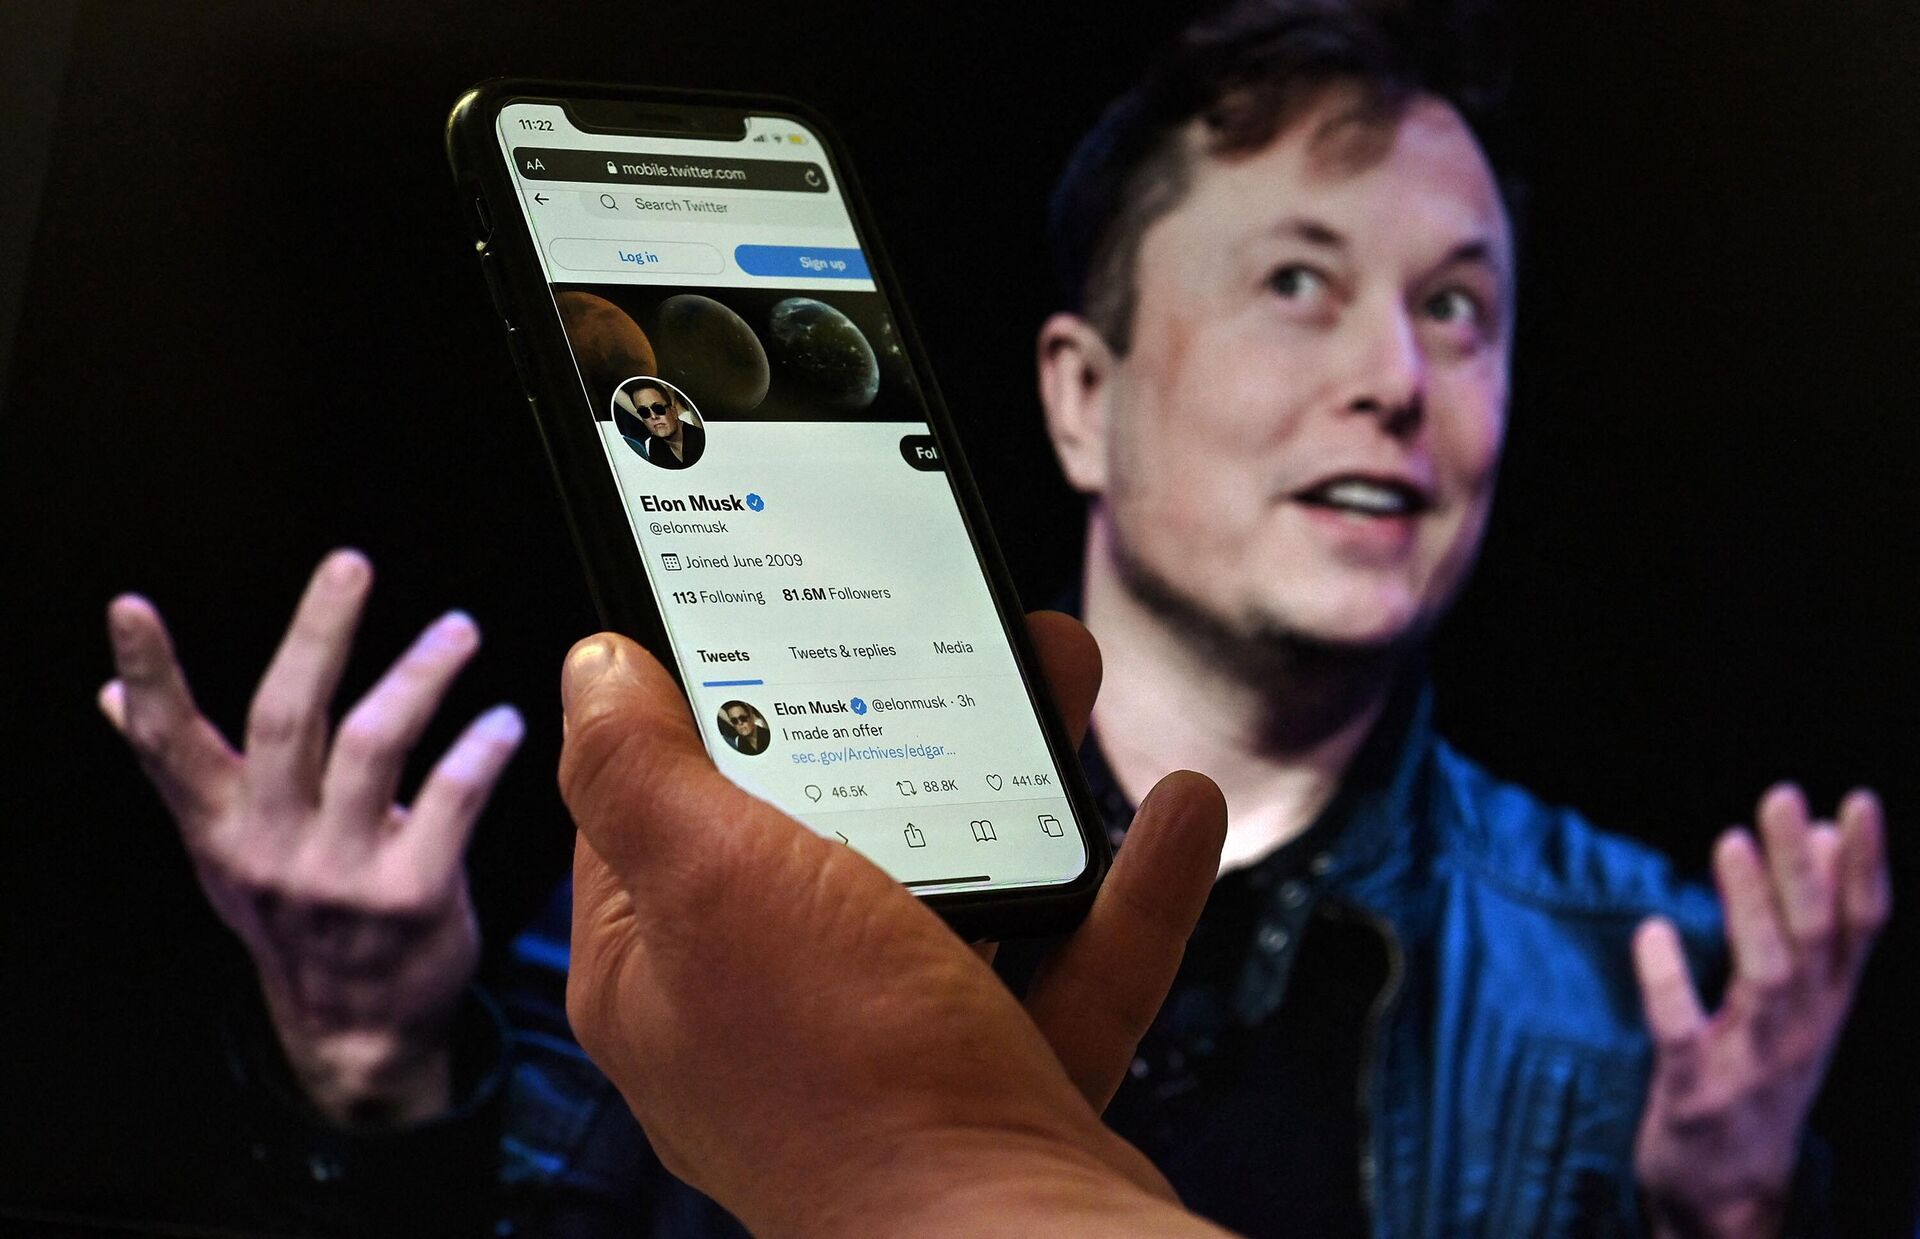 (FILES) In this file photo illustration taken on April 14, 2022 a phone screen displays the Twitter account of Elon Musk with a photo of him shown in the background, in Washington, DC.  - Sputnik International, 1920, 01.12.2022